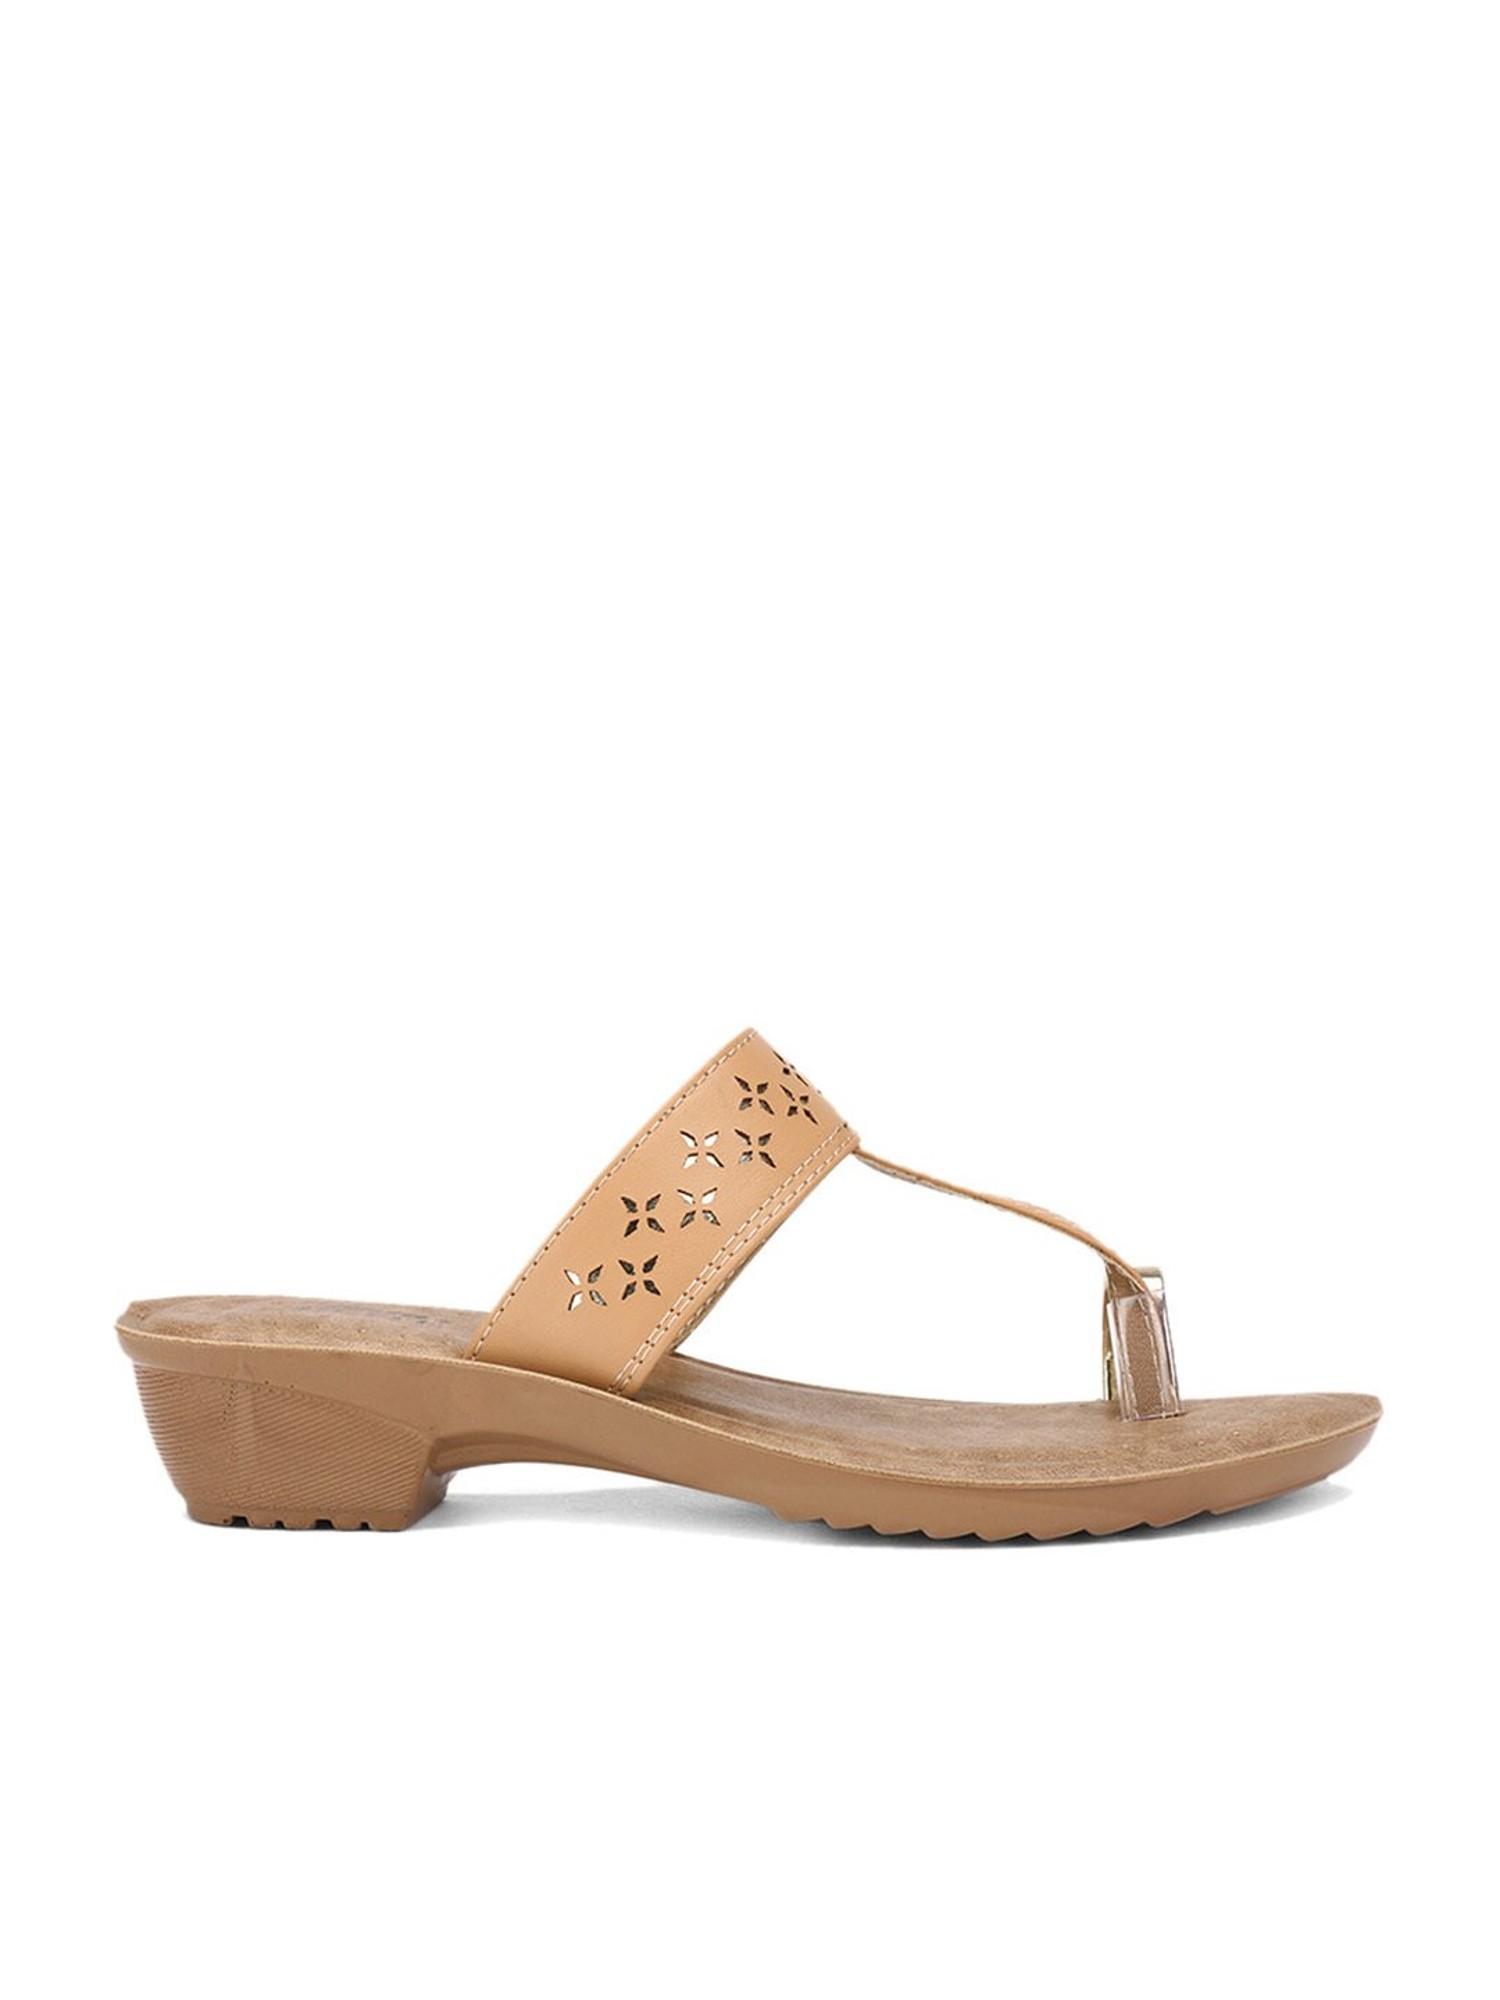 Pavers England Sandal Wedges with Buckle Fastening for Women